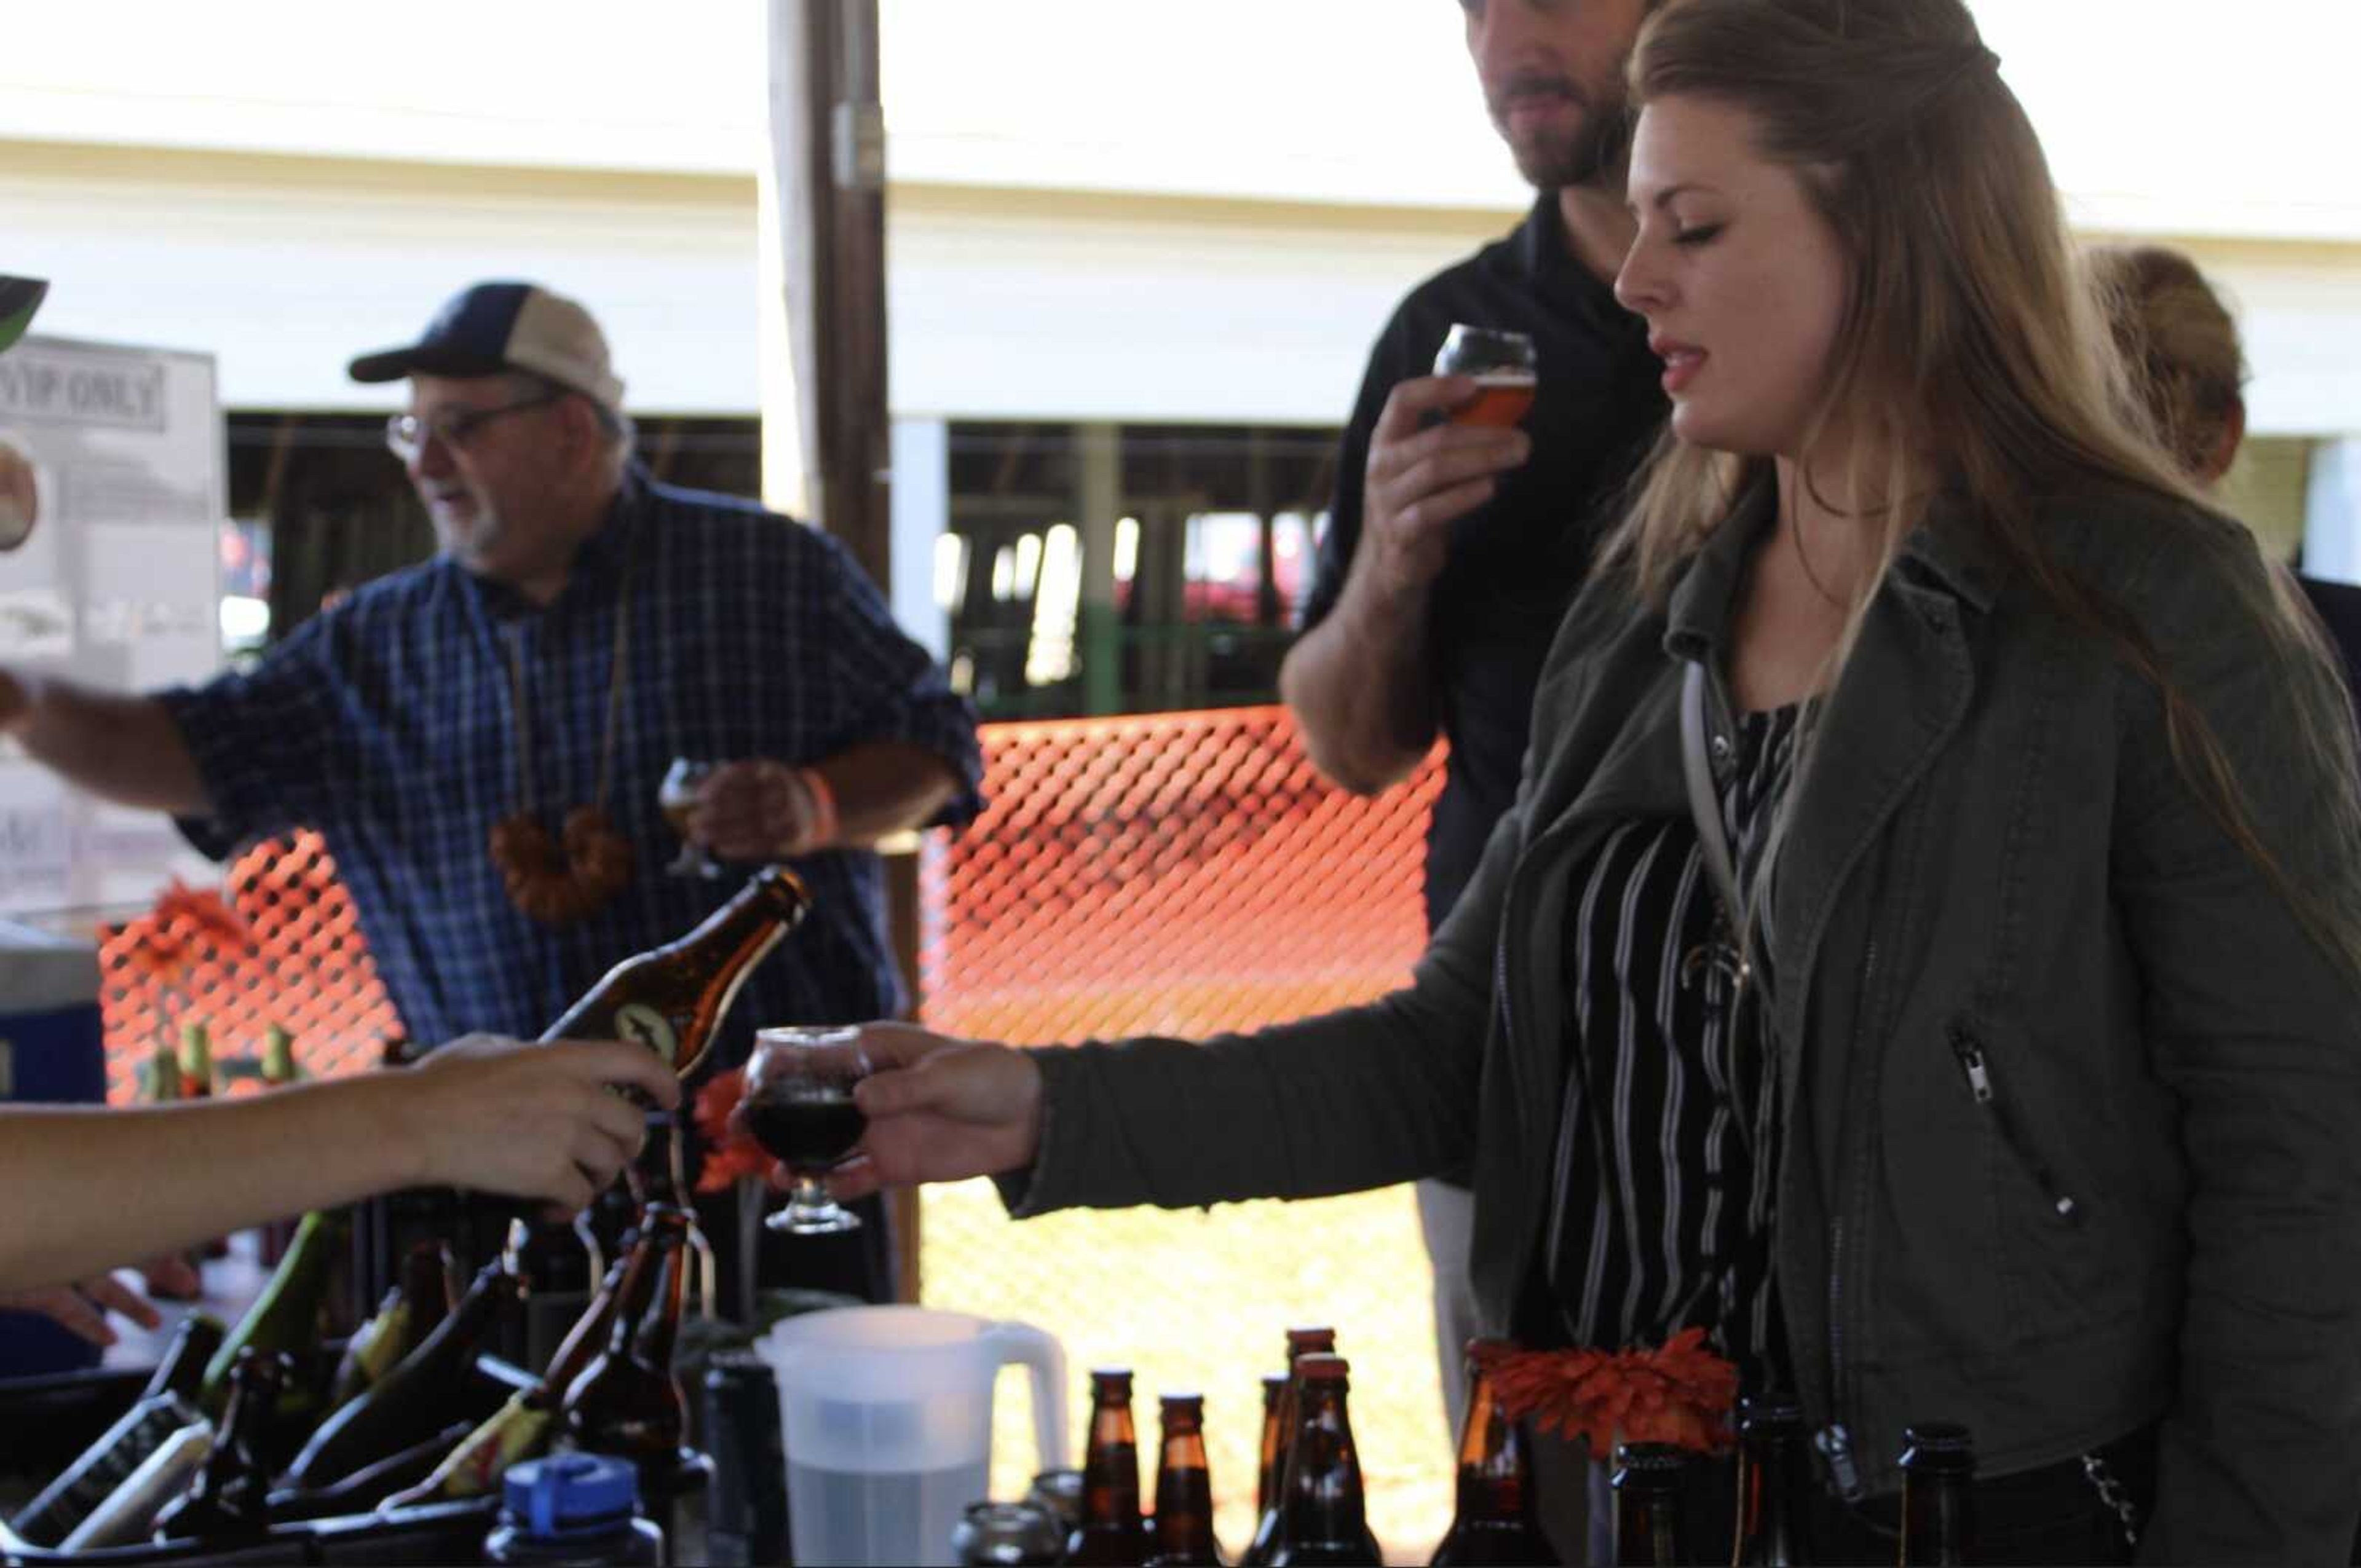 Community Counseling Center Foundation holds their 7th annual Craft Beer Festival